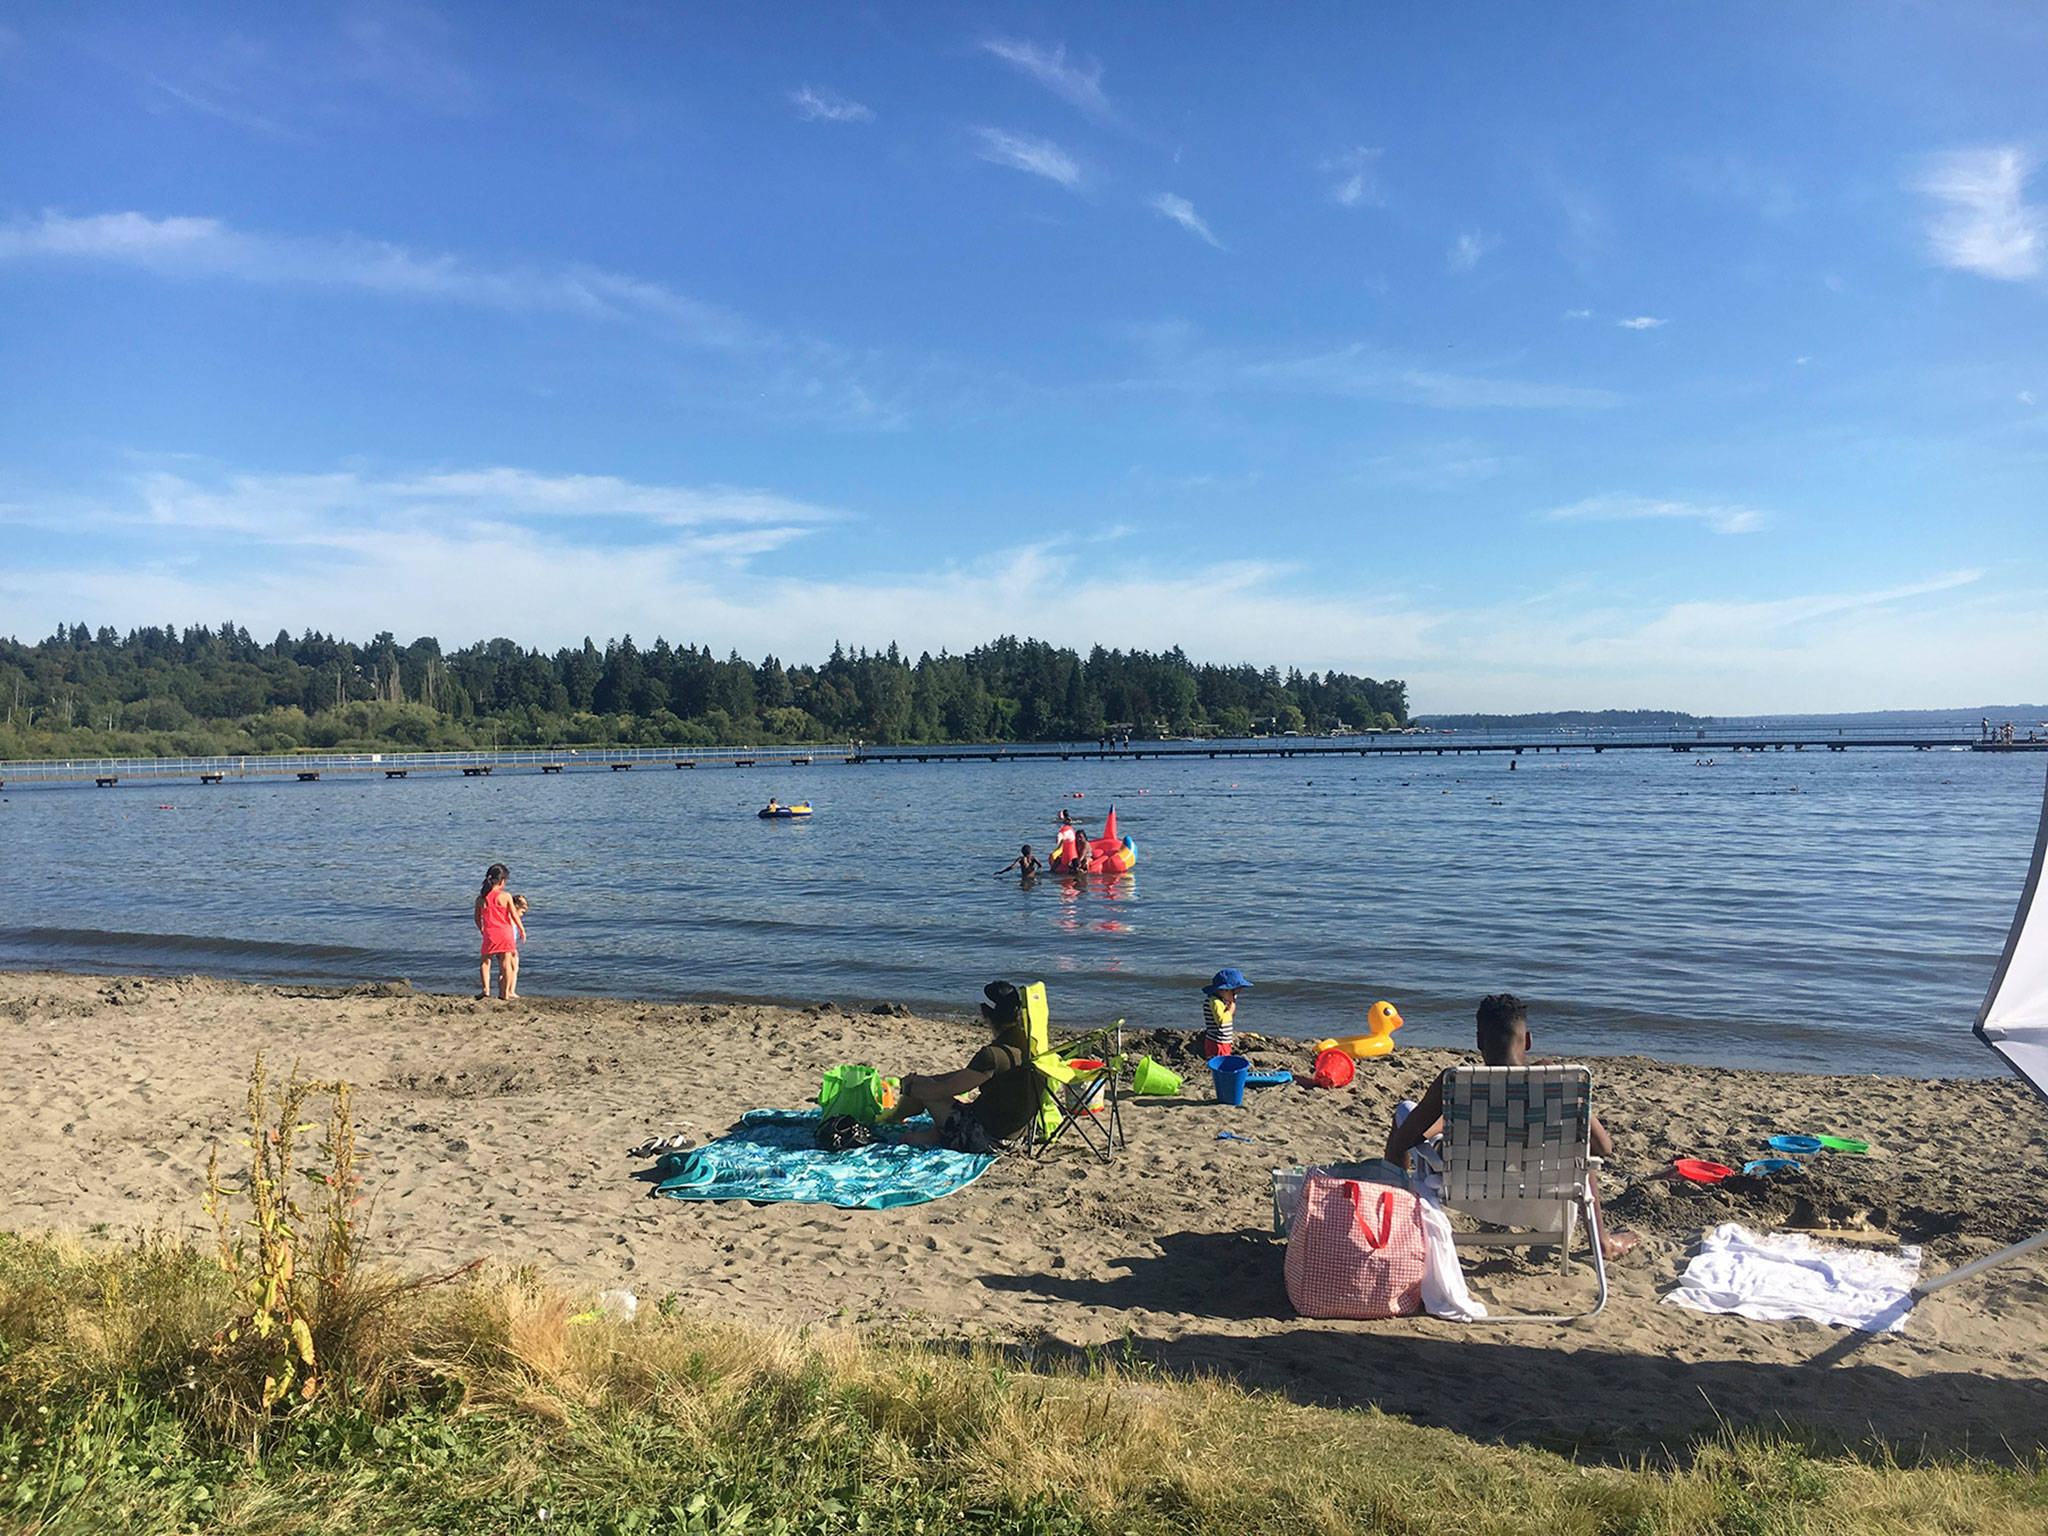 Locals enjoy the water at Juanita Beach Park, where the Friday farmer’s market is located. Katie Metzger/staff photo